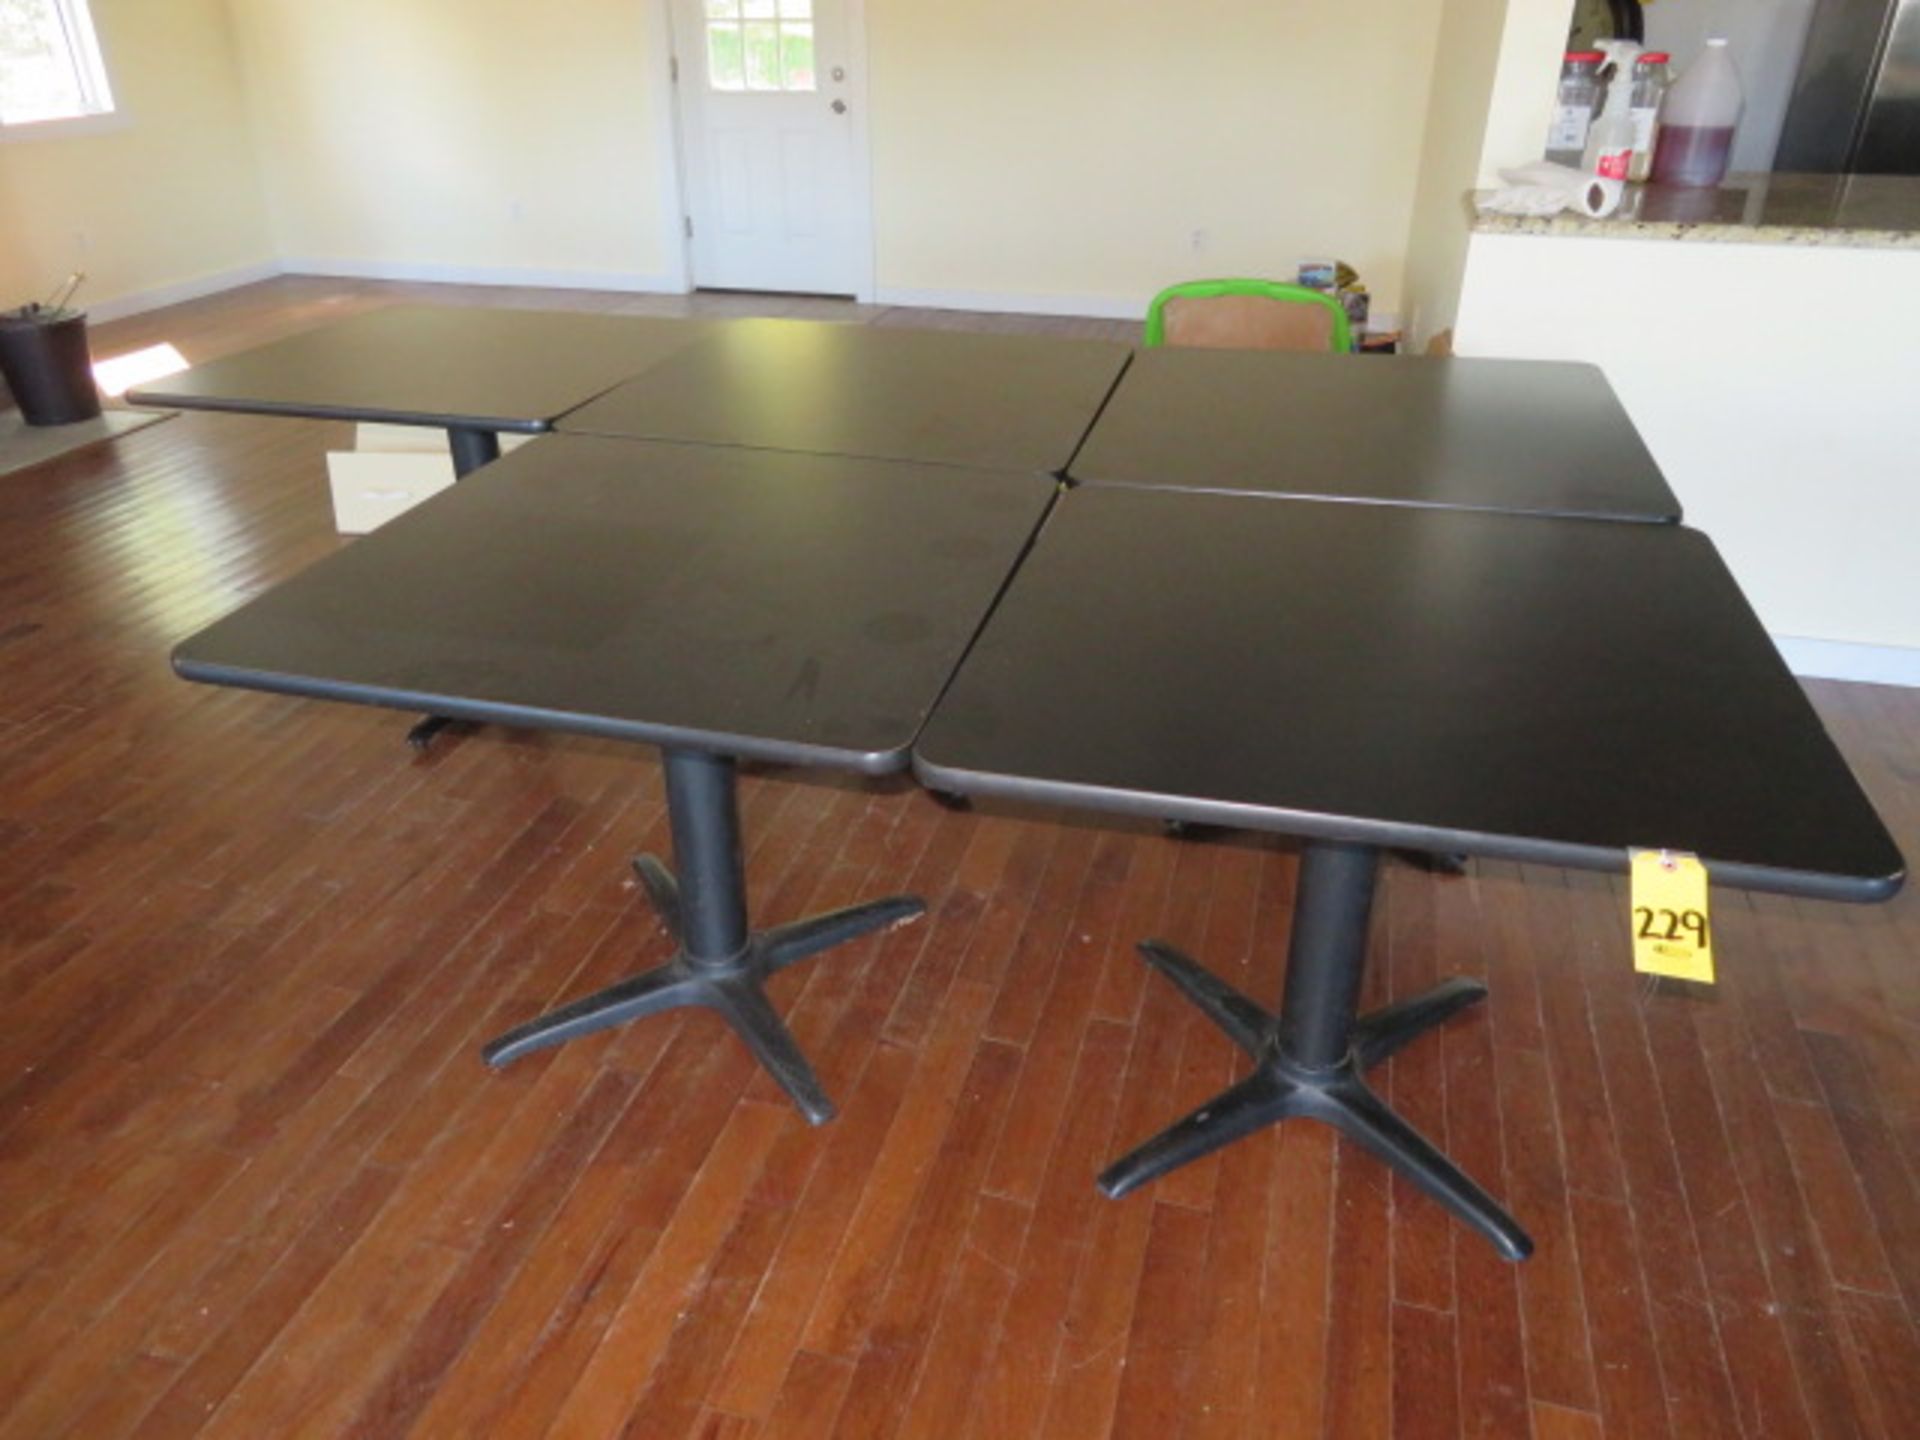 (3) 36" X 36" LAMINATE TOP TABLES 4-LEG SPIDER BASES (Located - Mays Landing, NJ) - Image 3 of 3